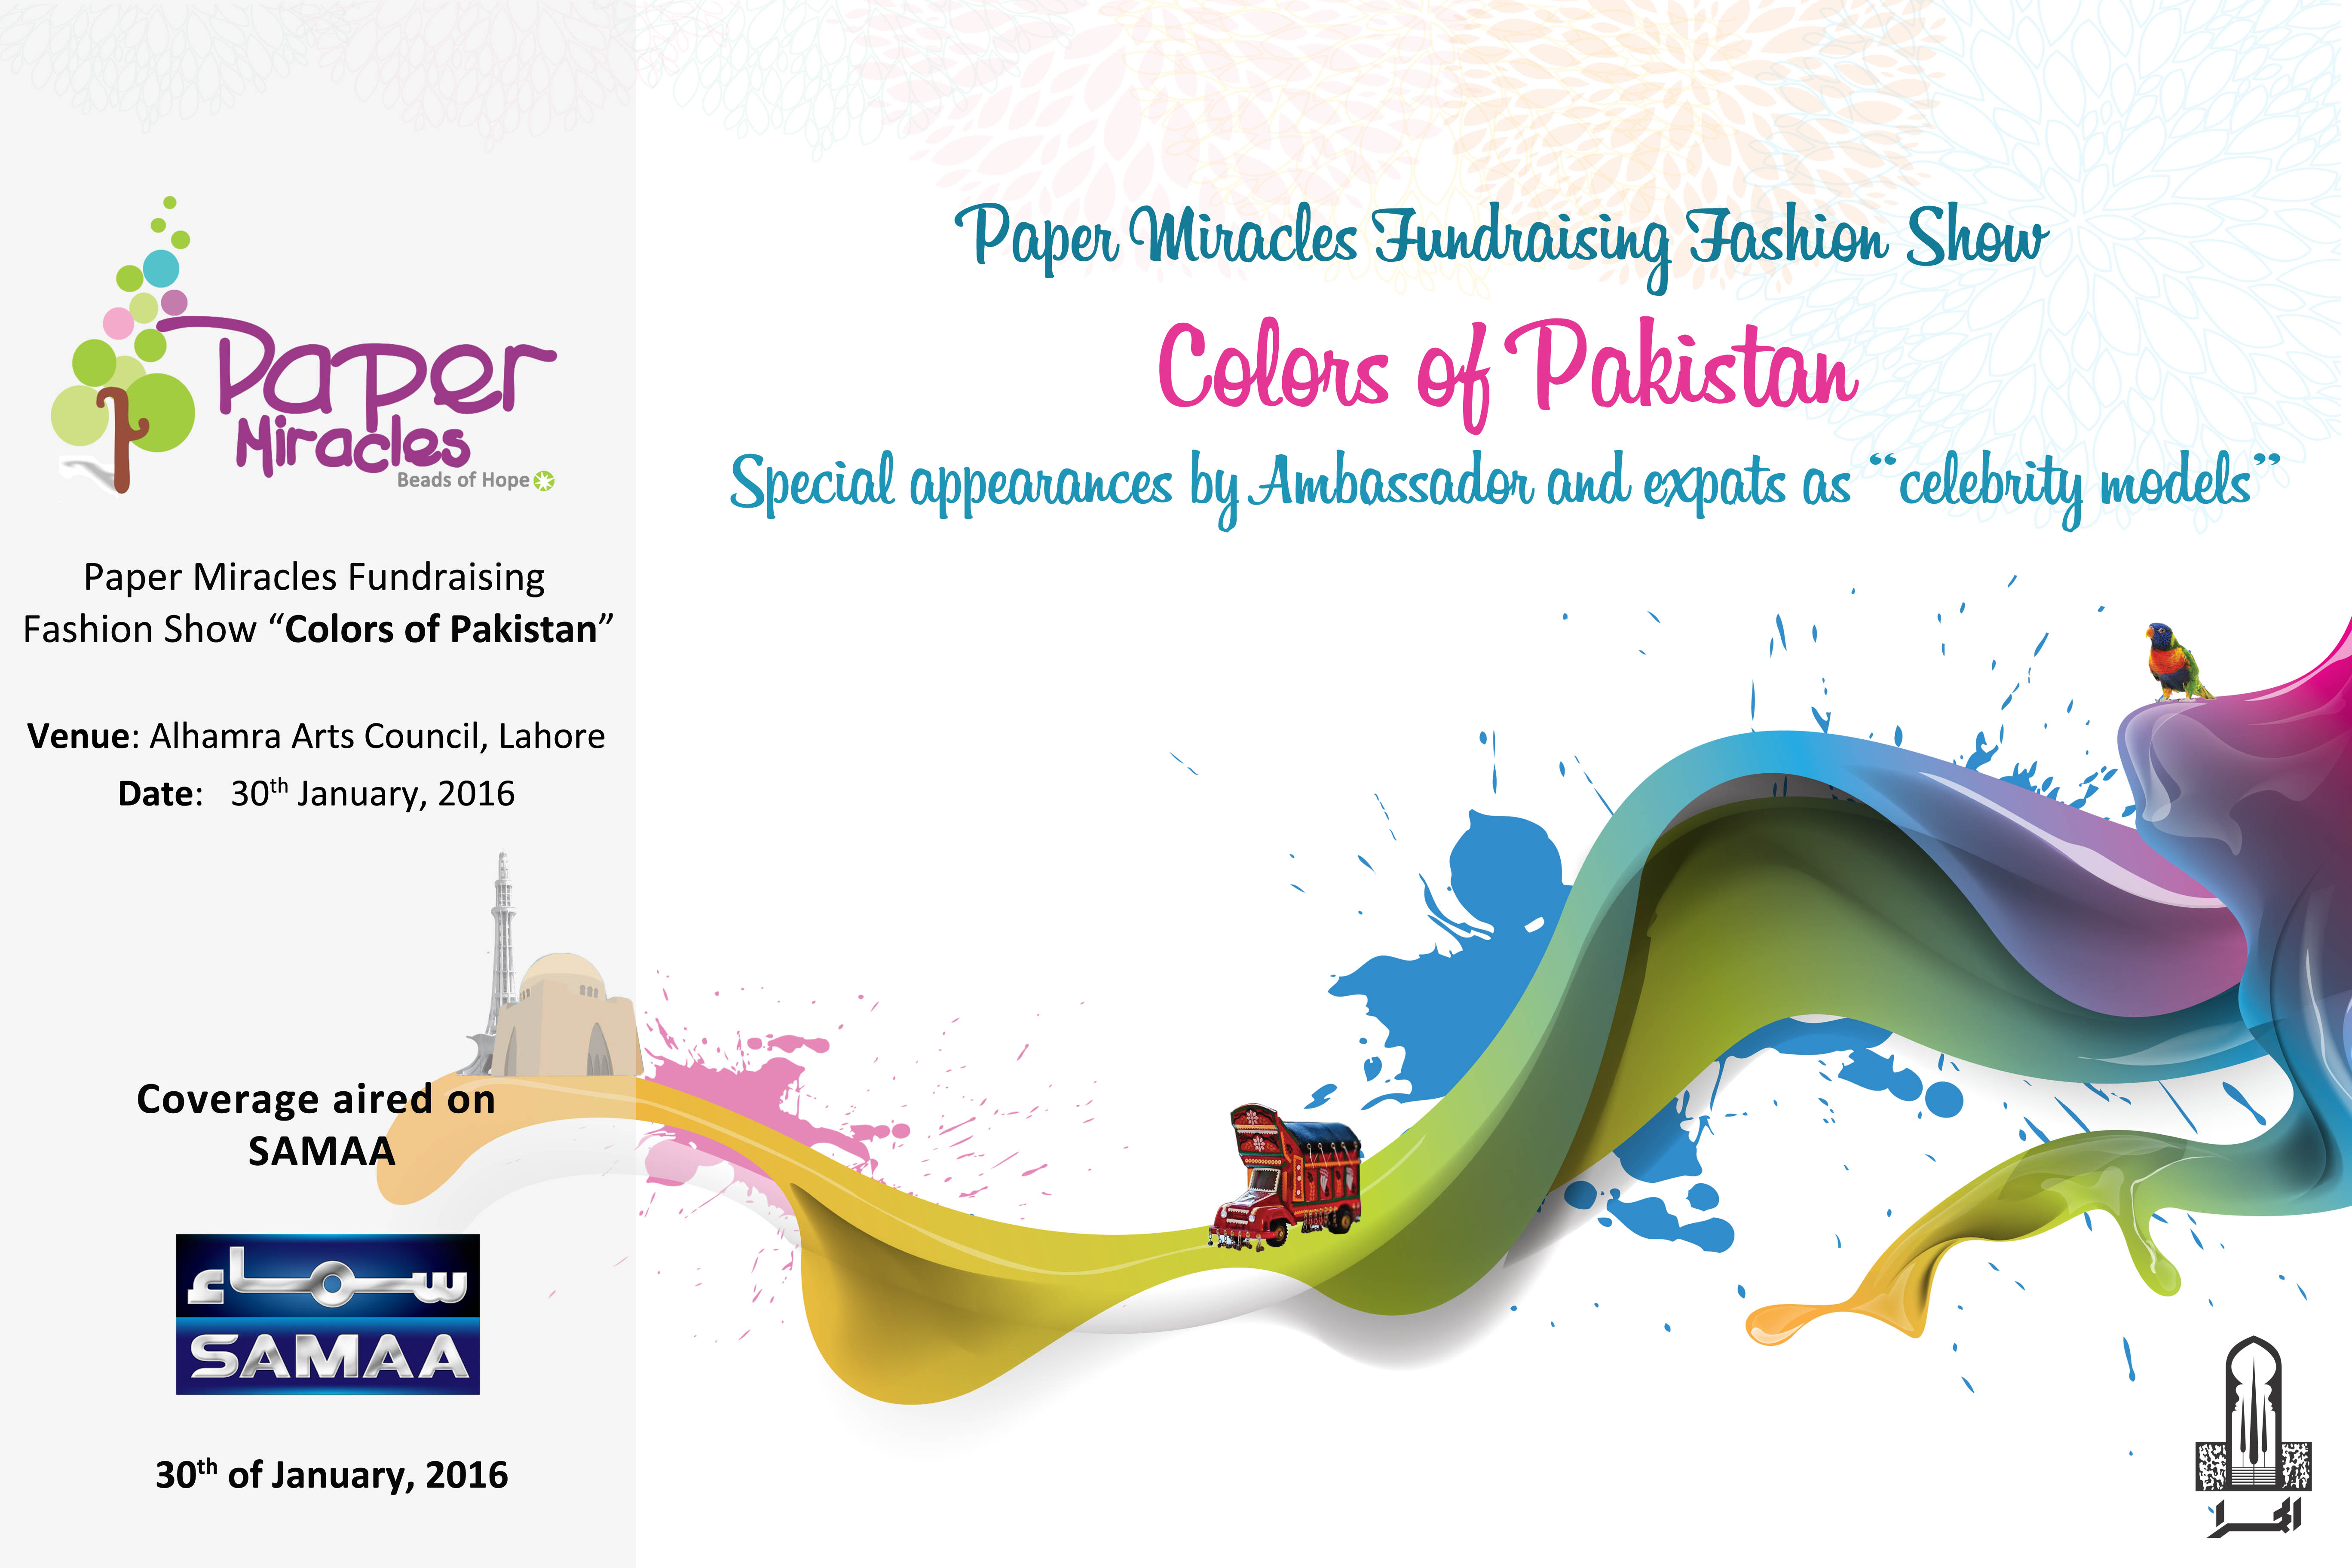 Fundraising fashion show – “Colors of Pakistan” coverage aired on SAMAA